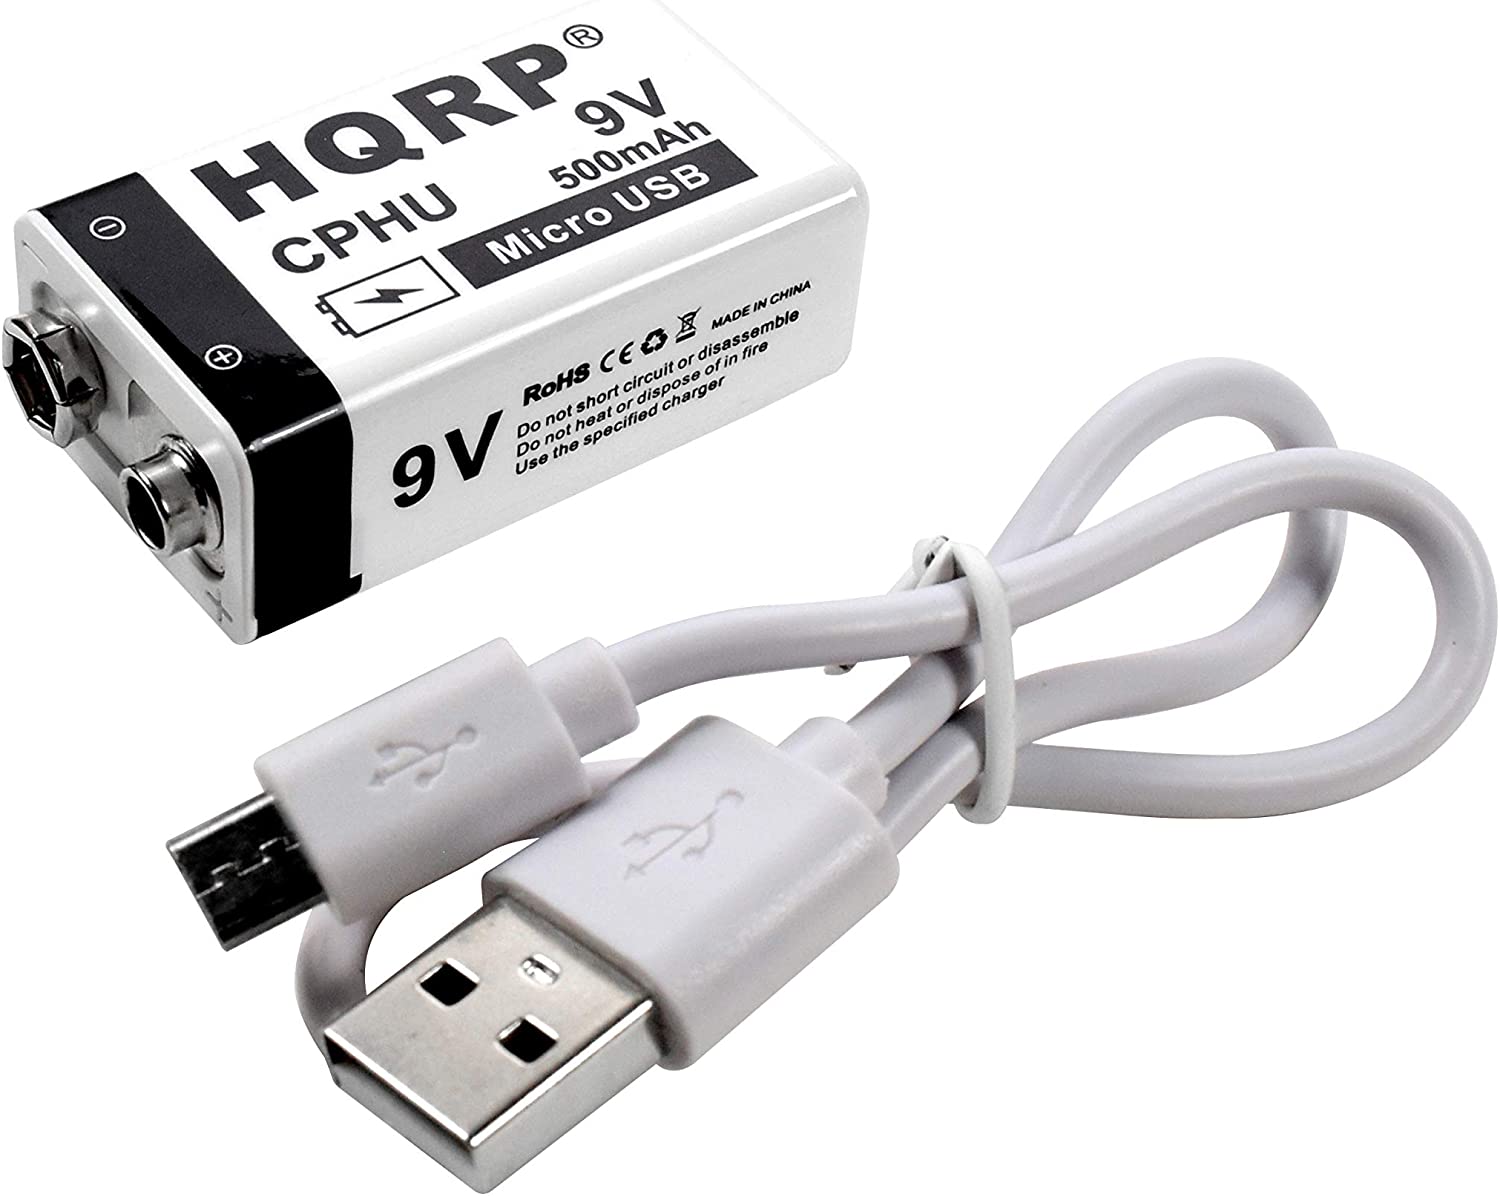 HQRP USB 9V Lithium-Ion Rechargeable Battery, High Capacity 500mAh 9-Volt, 1.5 H Fast Charge, 800 Cycle with Micro USB Cable, Radio Square 6LR61 7.2H5 6KR61 6HR61 PP3 MN1604 - image 4 of 8